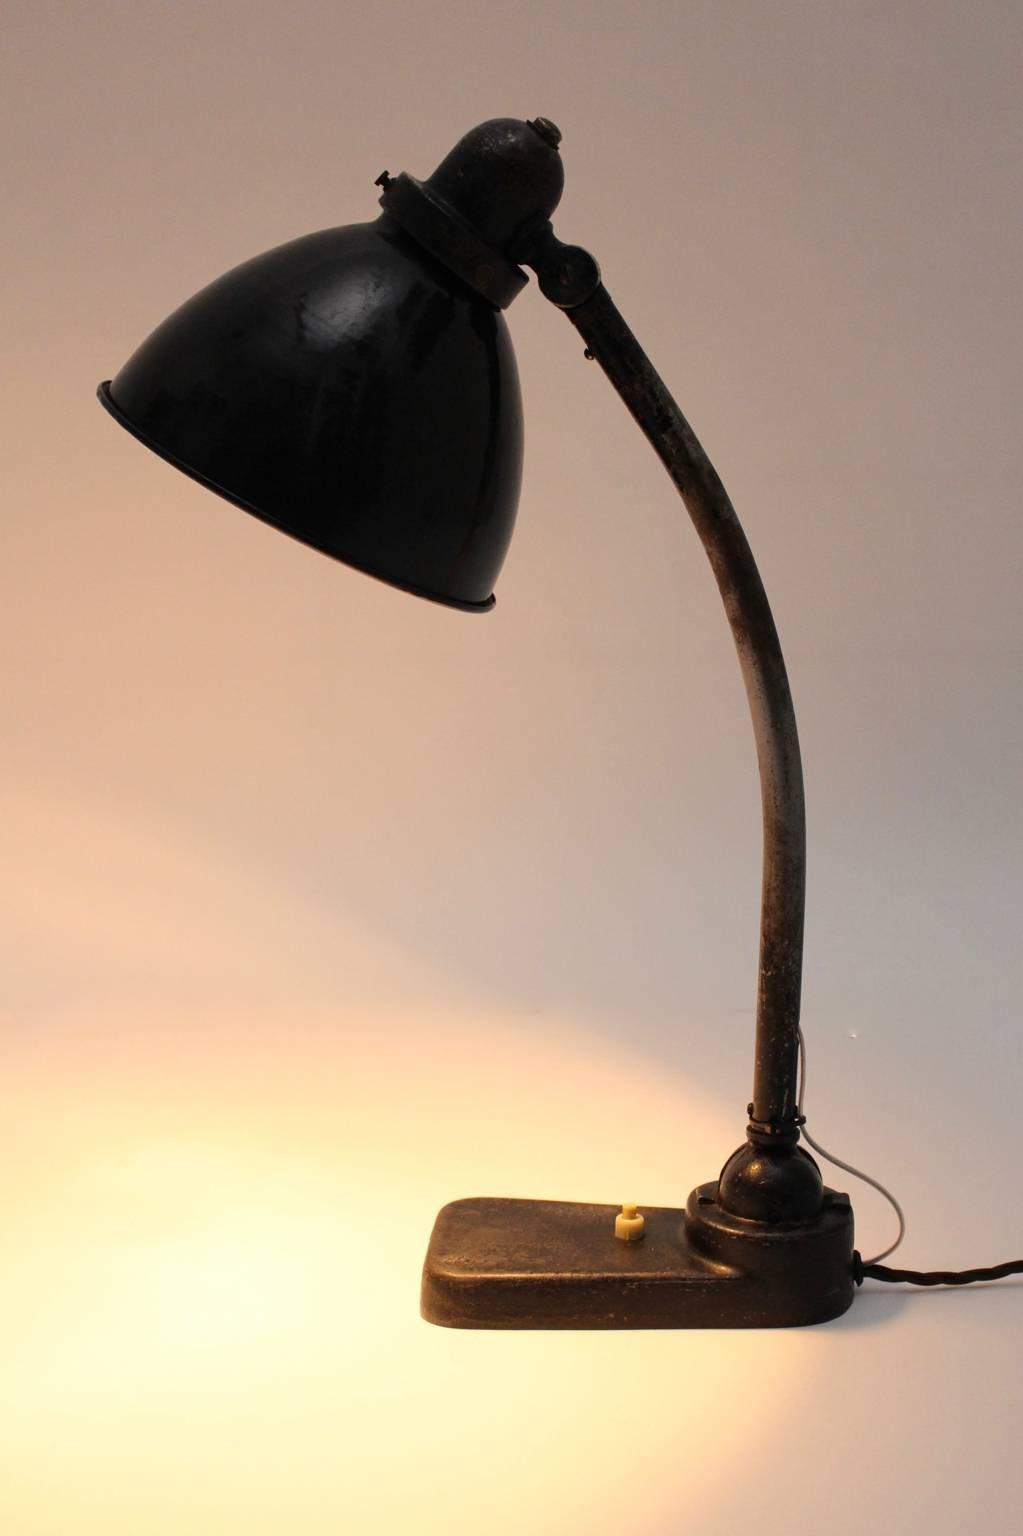 Bauhaus black lacquered vintage metal table lamp by Christian Dell 1930s, Germany with white enamel interior.
The table lamp or architect lamp was made of metal black lacquered, furthermore the shade is inside white enameled.
The stem is adjustable